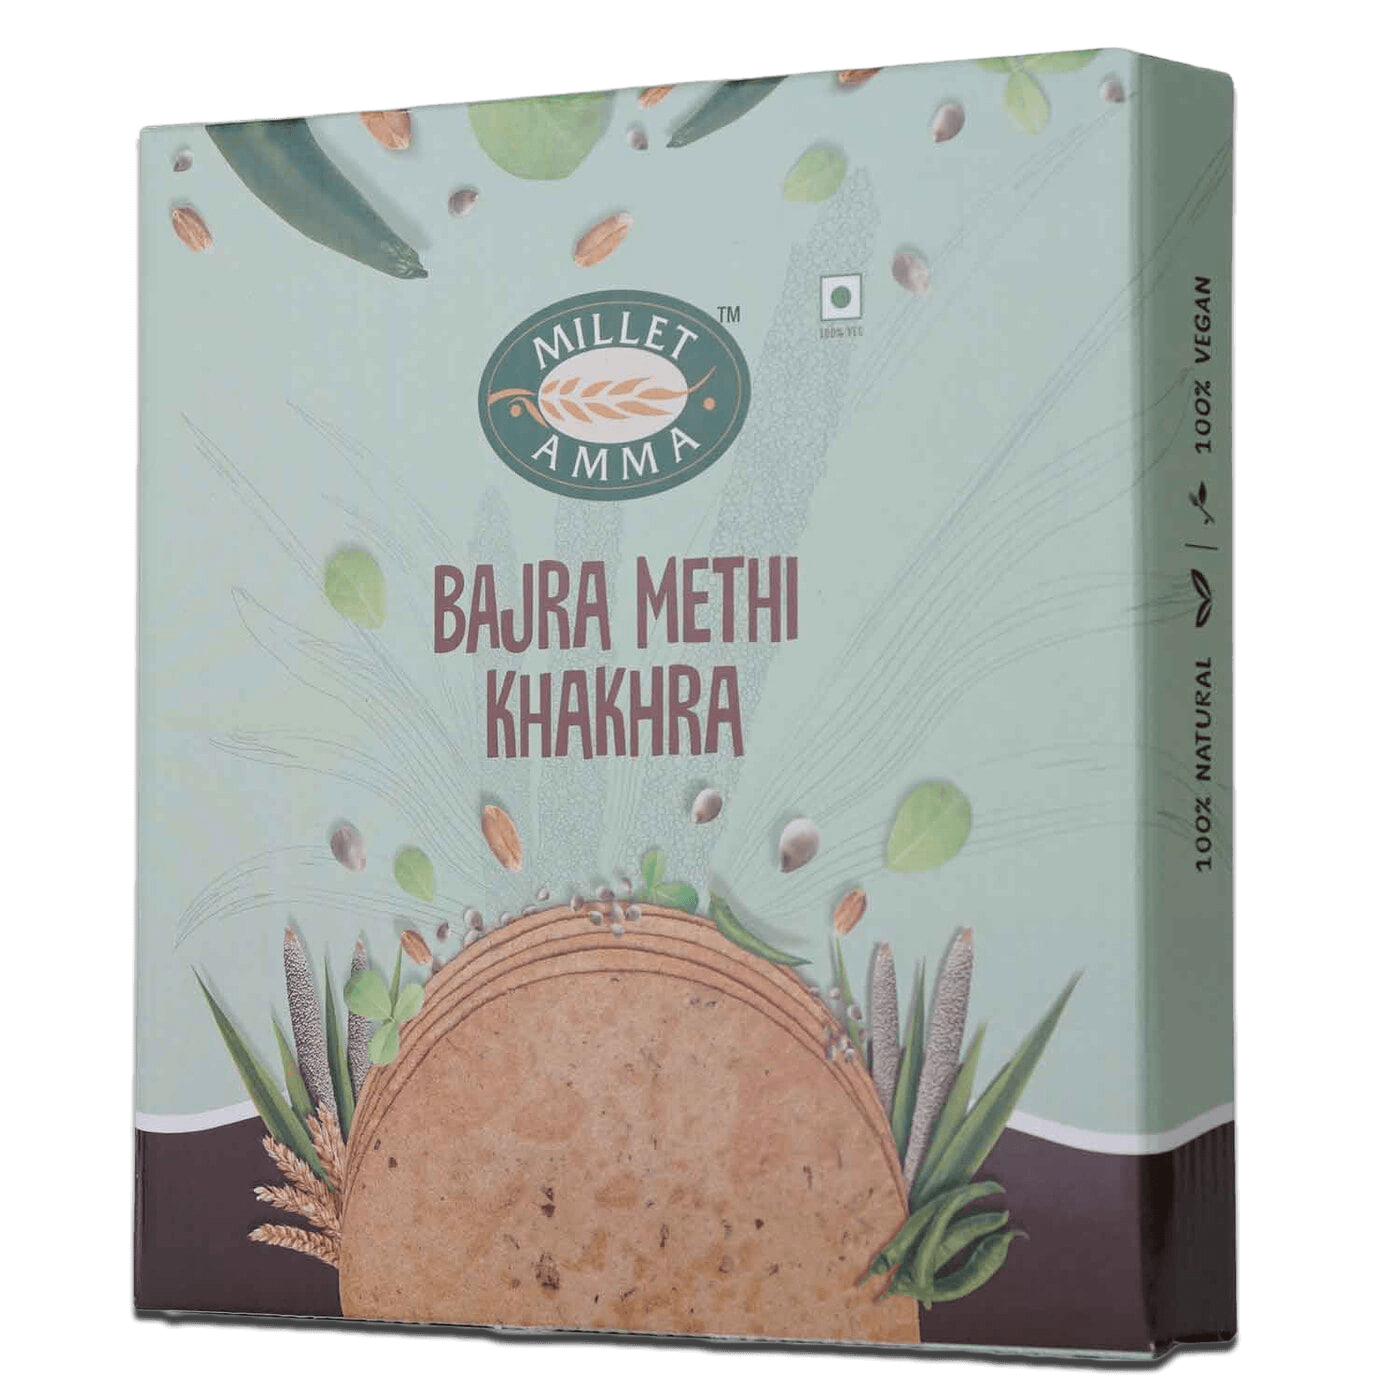 Millet Amma’s Bajra Methi Khakhra- A millet based, savoury cracker, introducing you to Millet Amma’s Bajra Methi Khakhra.  Made with Whole Wheat Flour, Bajra Millet, Methi Leaves, Rice Bran Oil and Green Chili.  Unlike other khakhras, Amma’s bajra khakhra is baked and not fried in oil. Crunchy and melt in your mouth this khakhra is perfect for guilt-free binging.